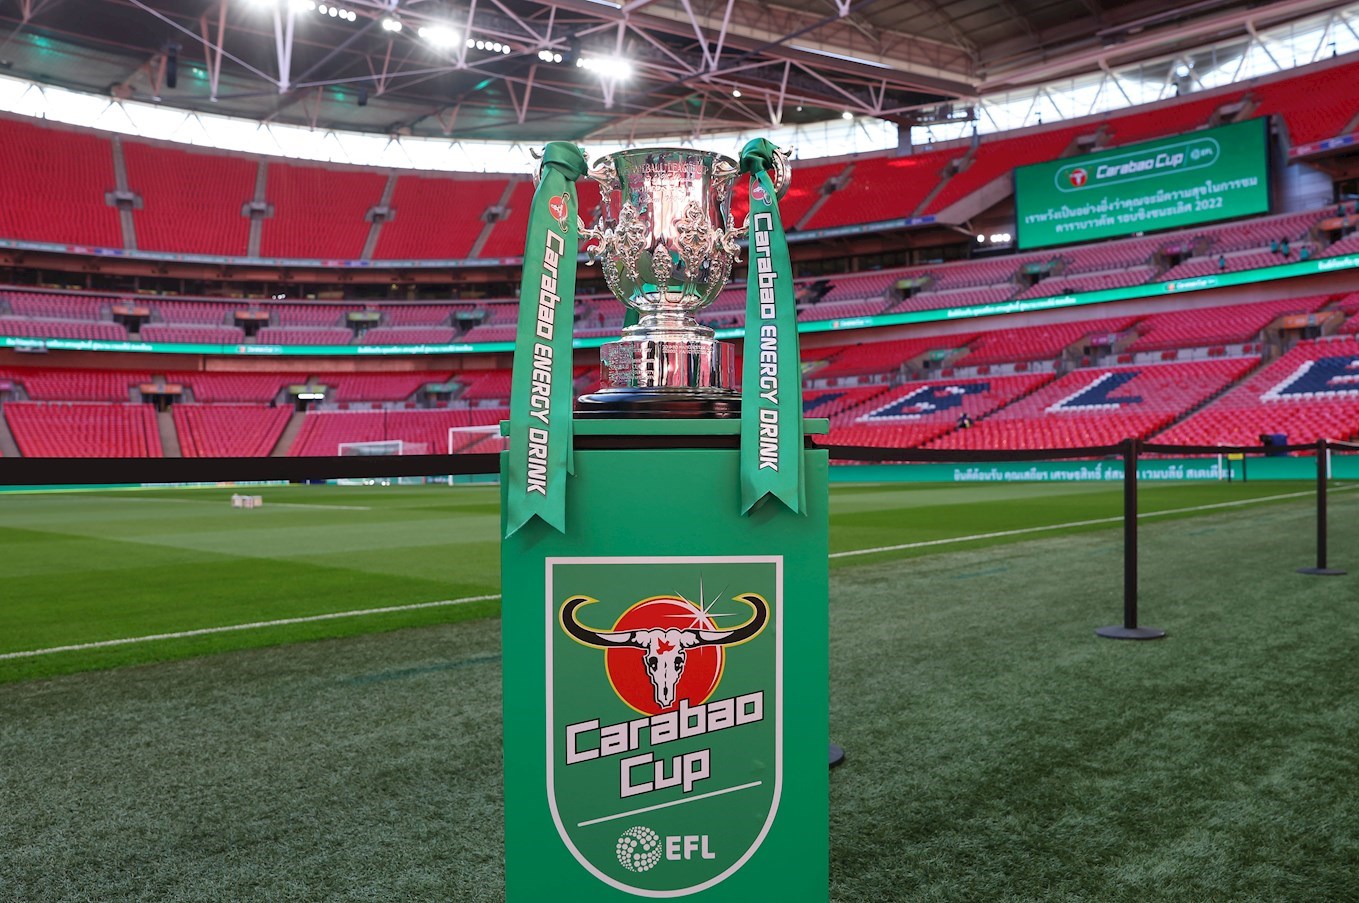 NEWS Carabao Cup draw to take place on EFL Fixture Release Day - News